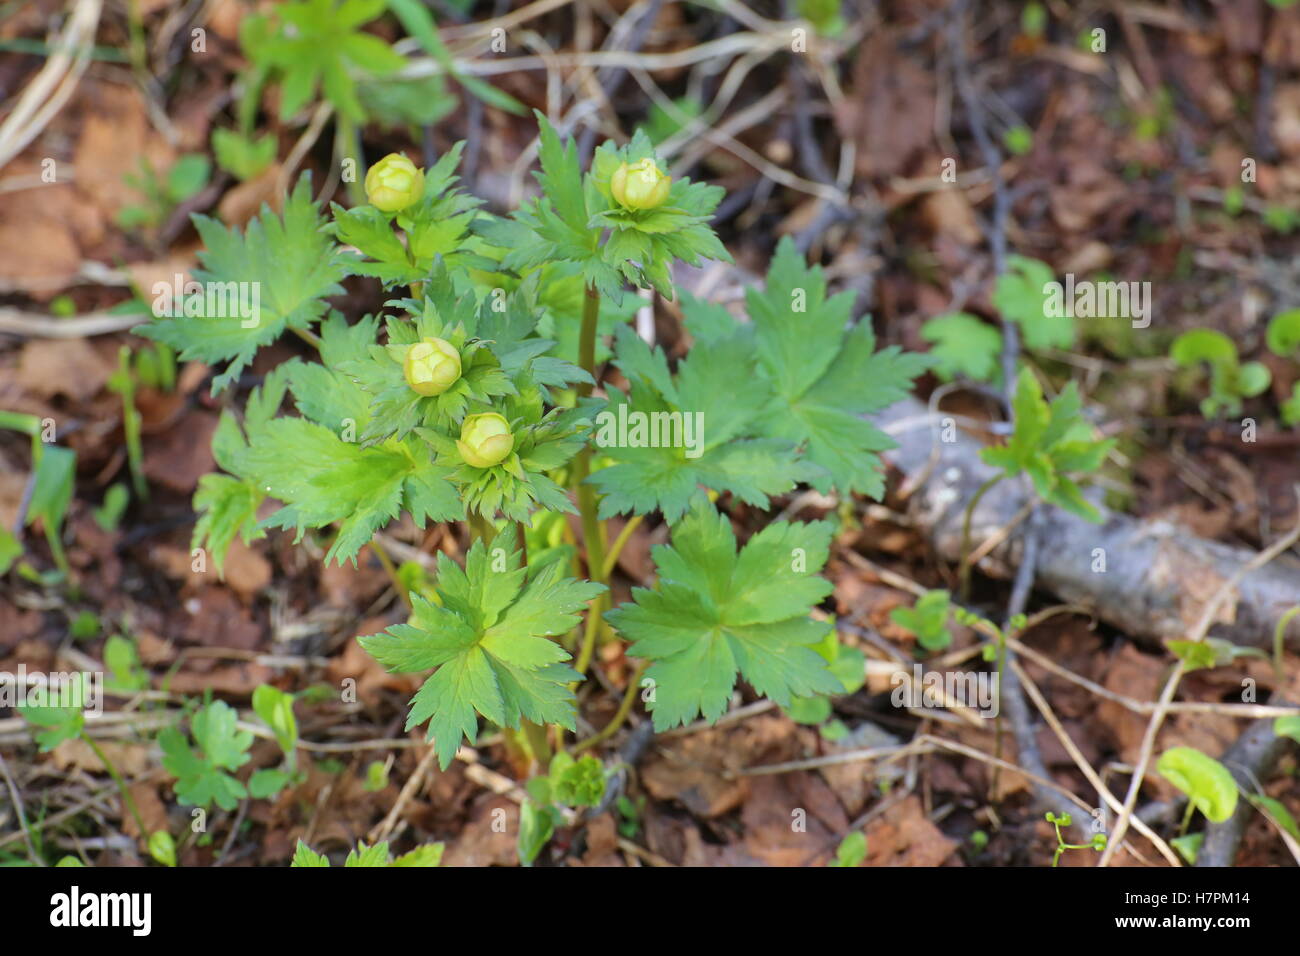 Trollius europaeus (globeflower) in early blossoming stage. Stock Photo